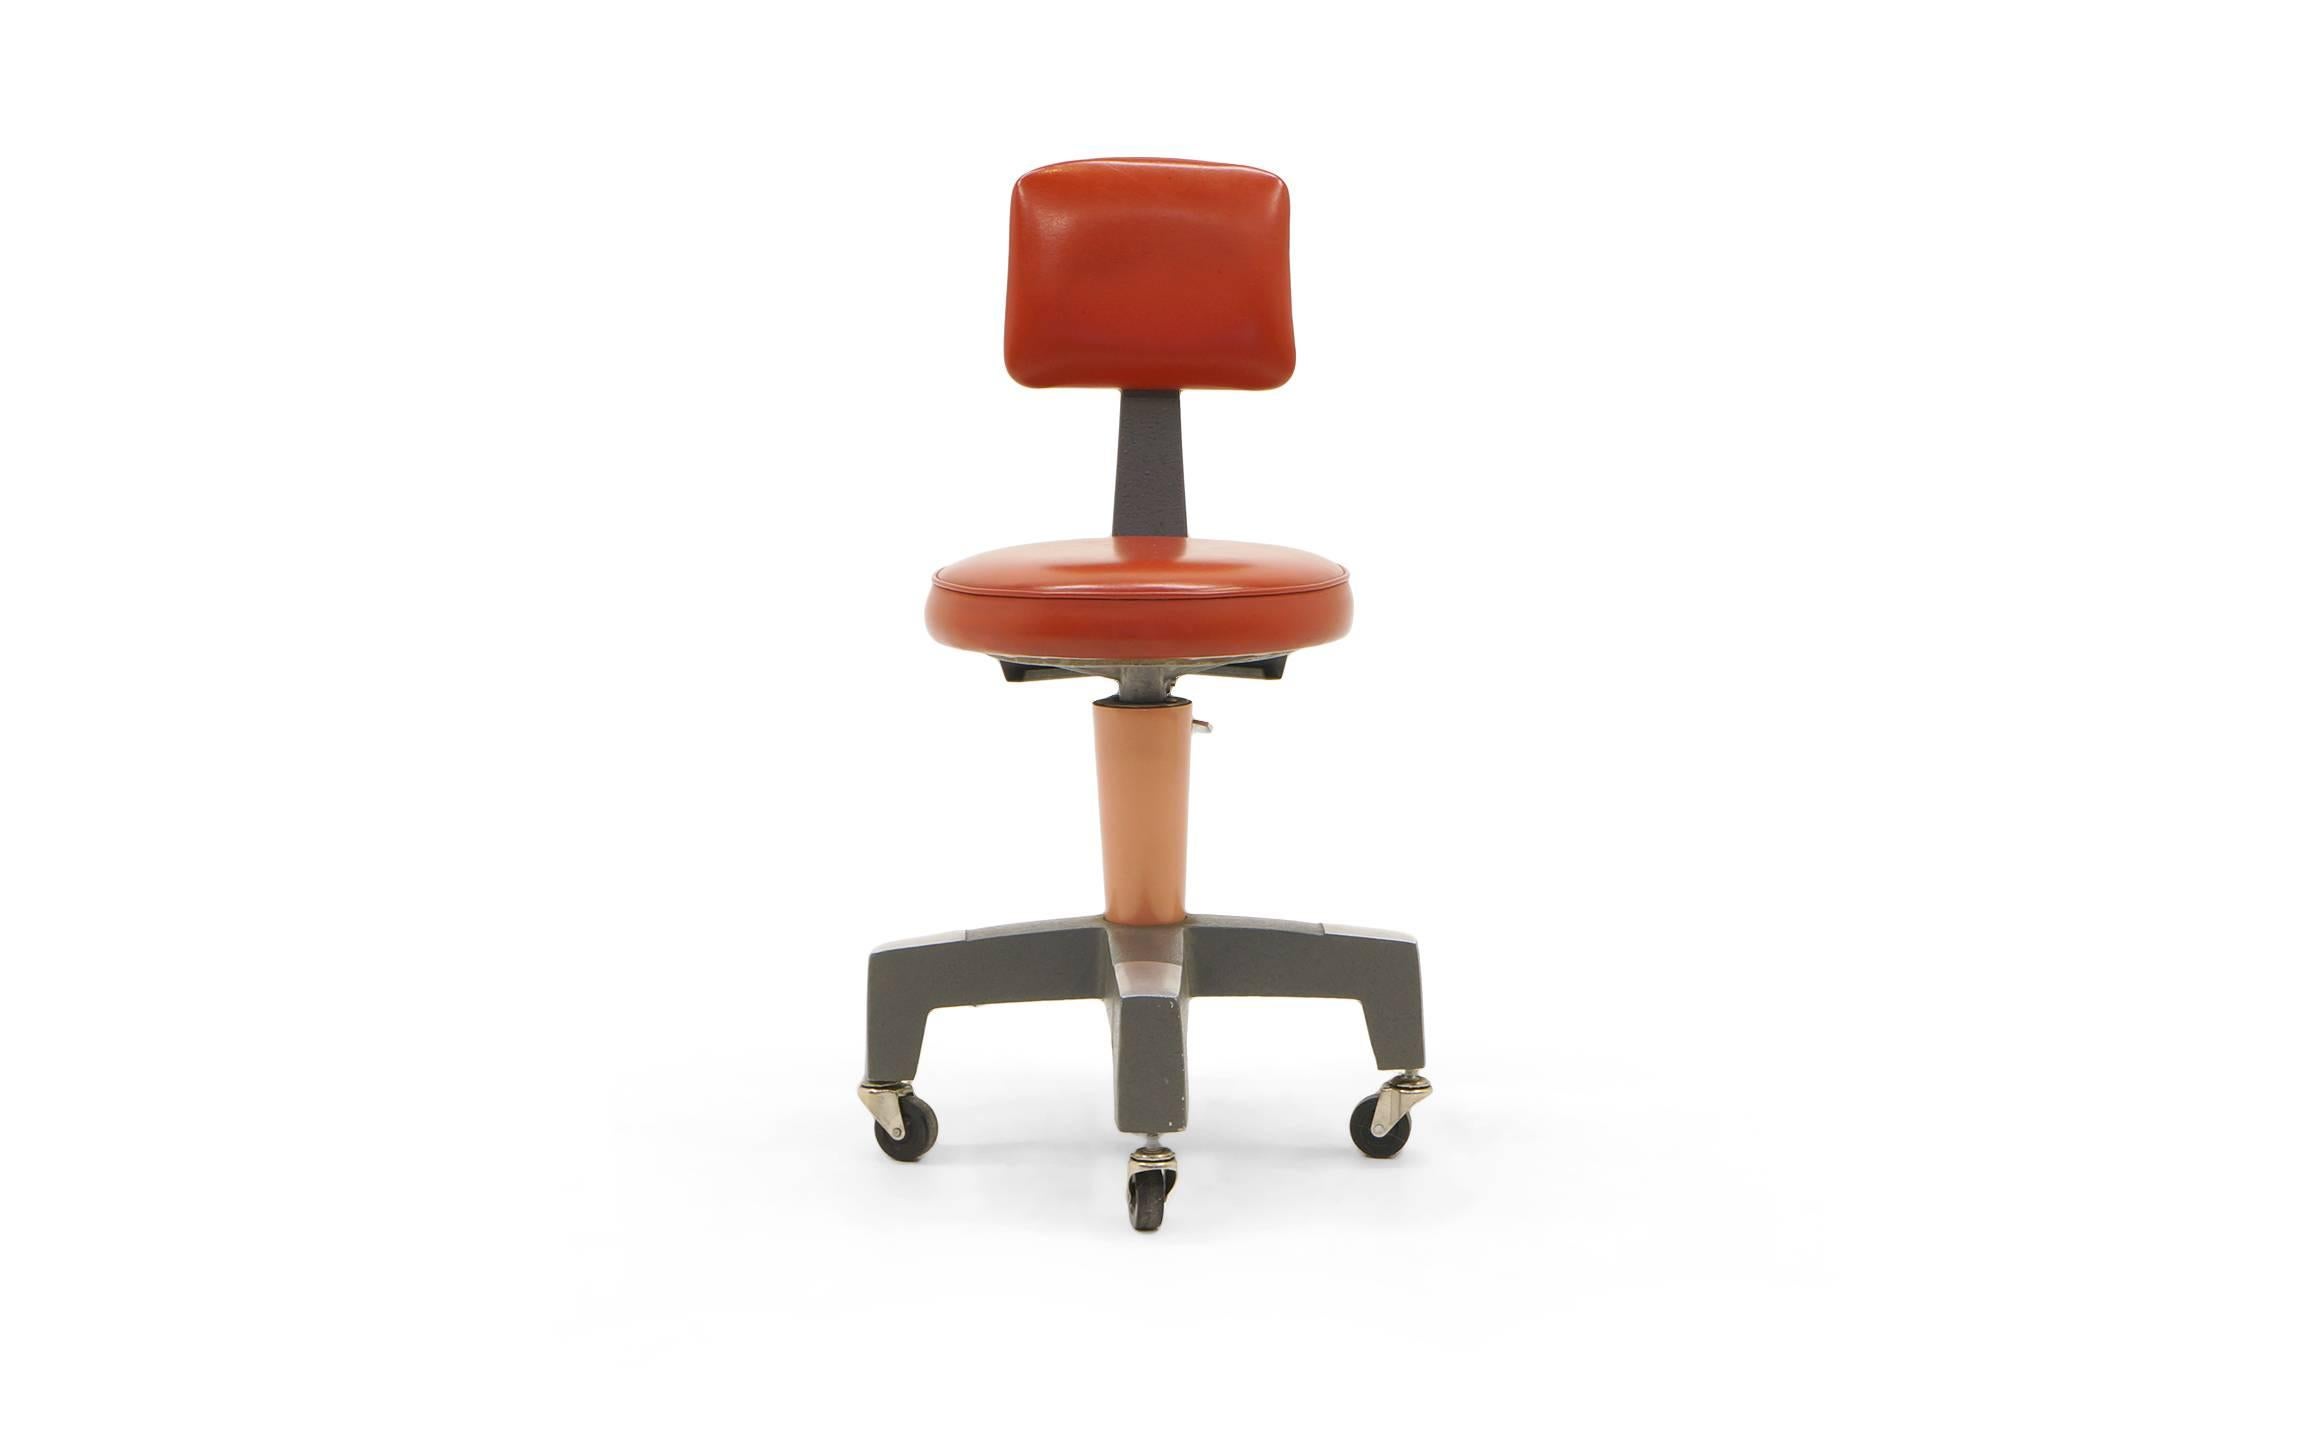 1950s Industrial Design work chair on casters, also swivels. One of the coolest designs we have seen. Would make a great desk chair. Model number 14090 by the American Optical Corporation. The red-orange vinyl is in excellent condition with no tears